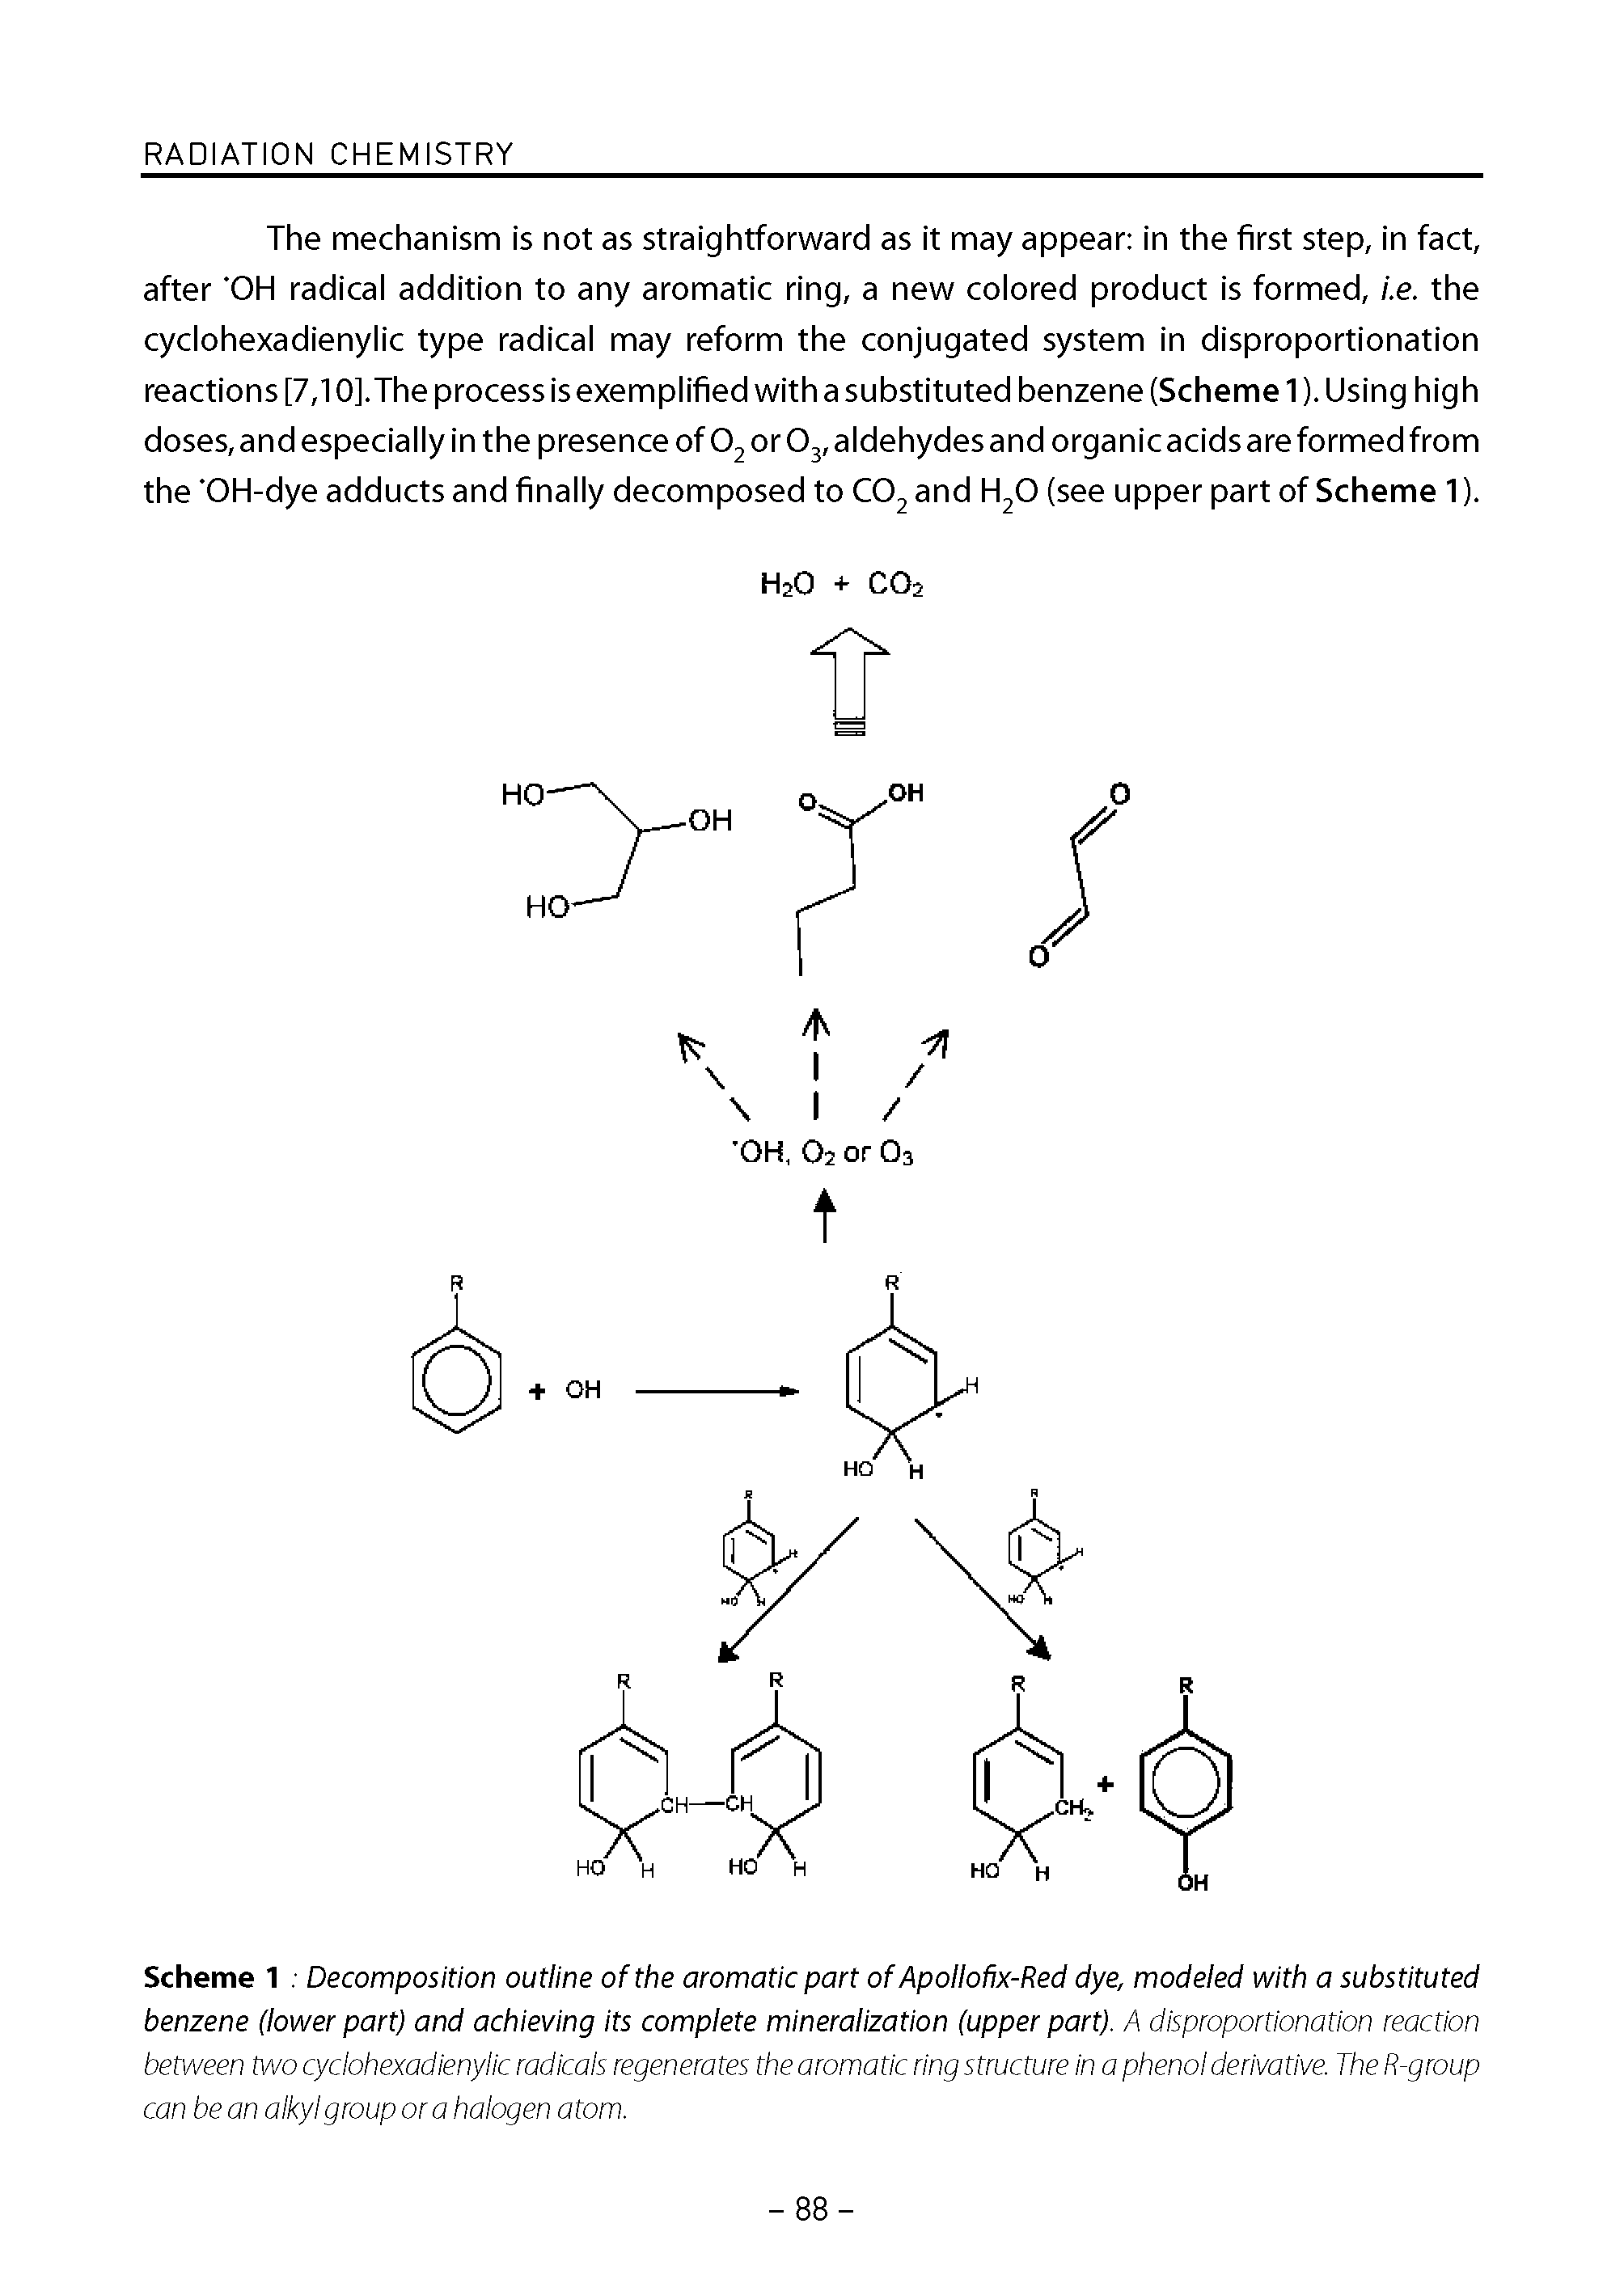 Scheme 1 Decomposition outline ofthe aromatic part of Apollofix-Red dye, modeled with a substituted benzene (lower part) and achieving its complete mineralization (upper part). A disproportionation reaction between two cyclohexadienylic radicals regenerates the aromatic ring structure In a phenol derivative. The R-group can be an alkyl group ora halogen atom.